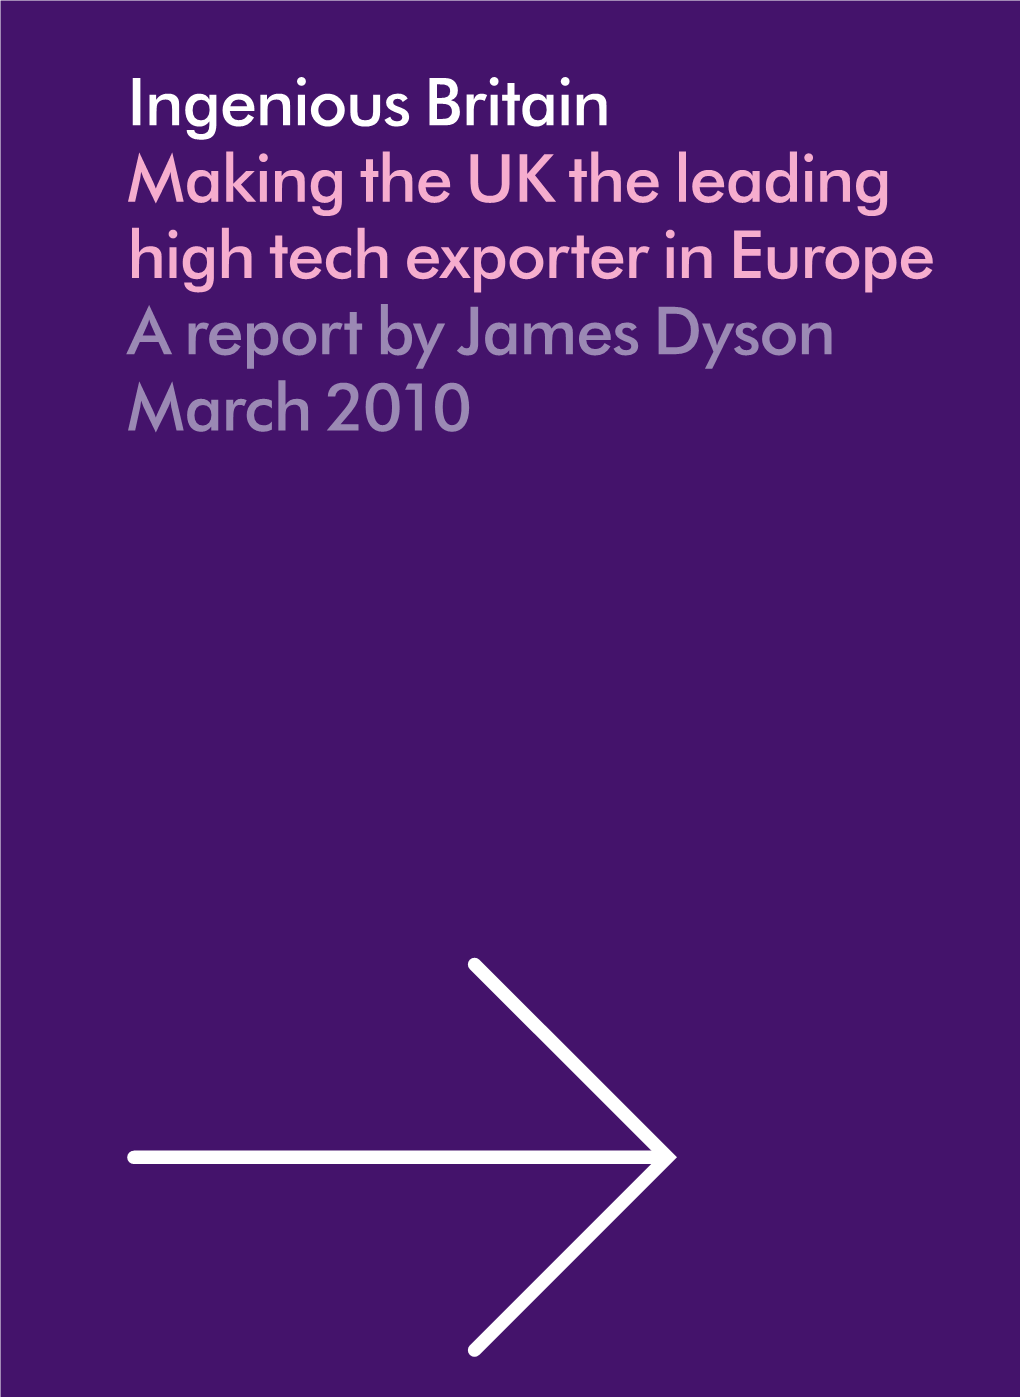 Ingenious Britain: Making the UK the Leading High Tech Exporter in Europe